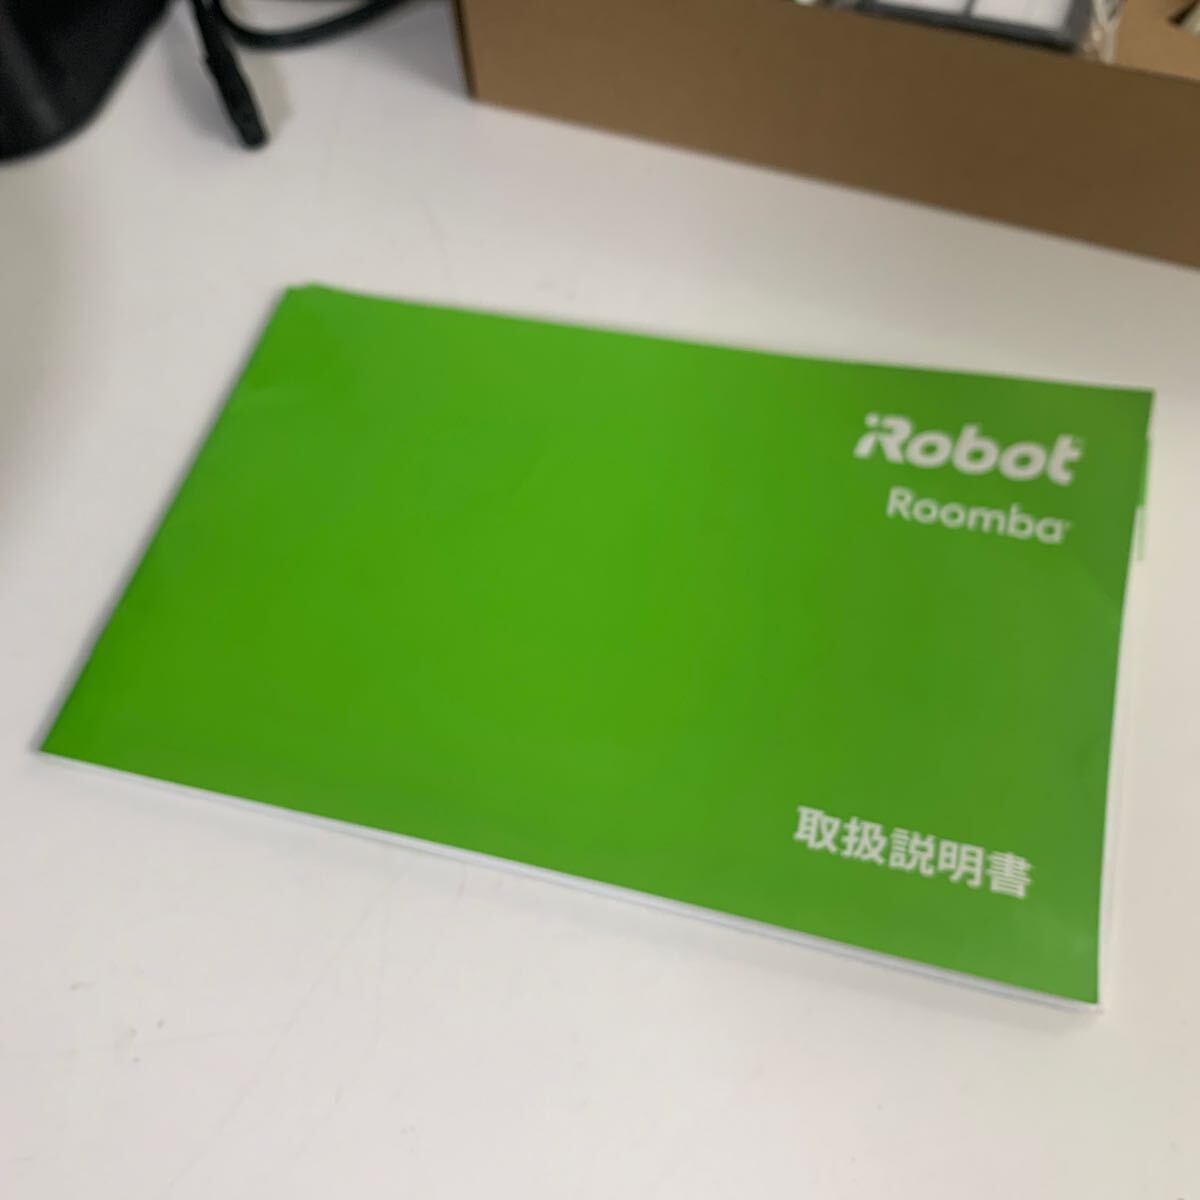 iRobot I robot Roomba 980 roomba vacuum cleaner robot vacuum cleaner instructions box attaching operation verification ending 